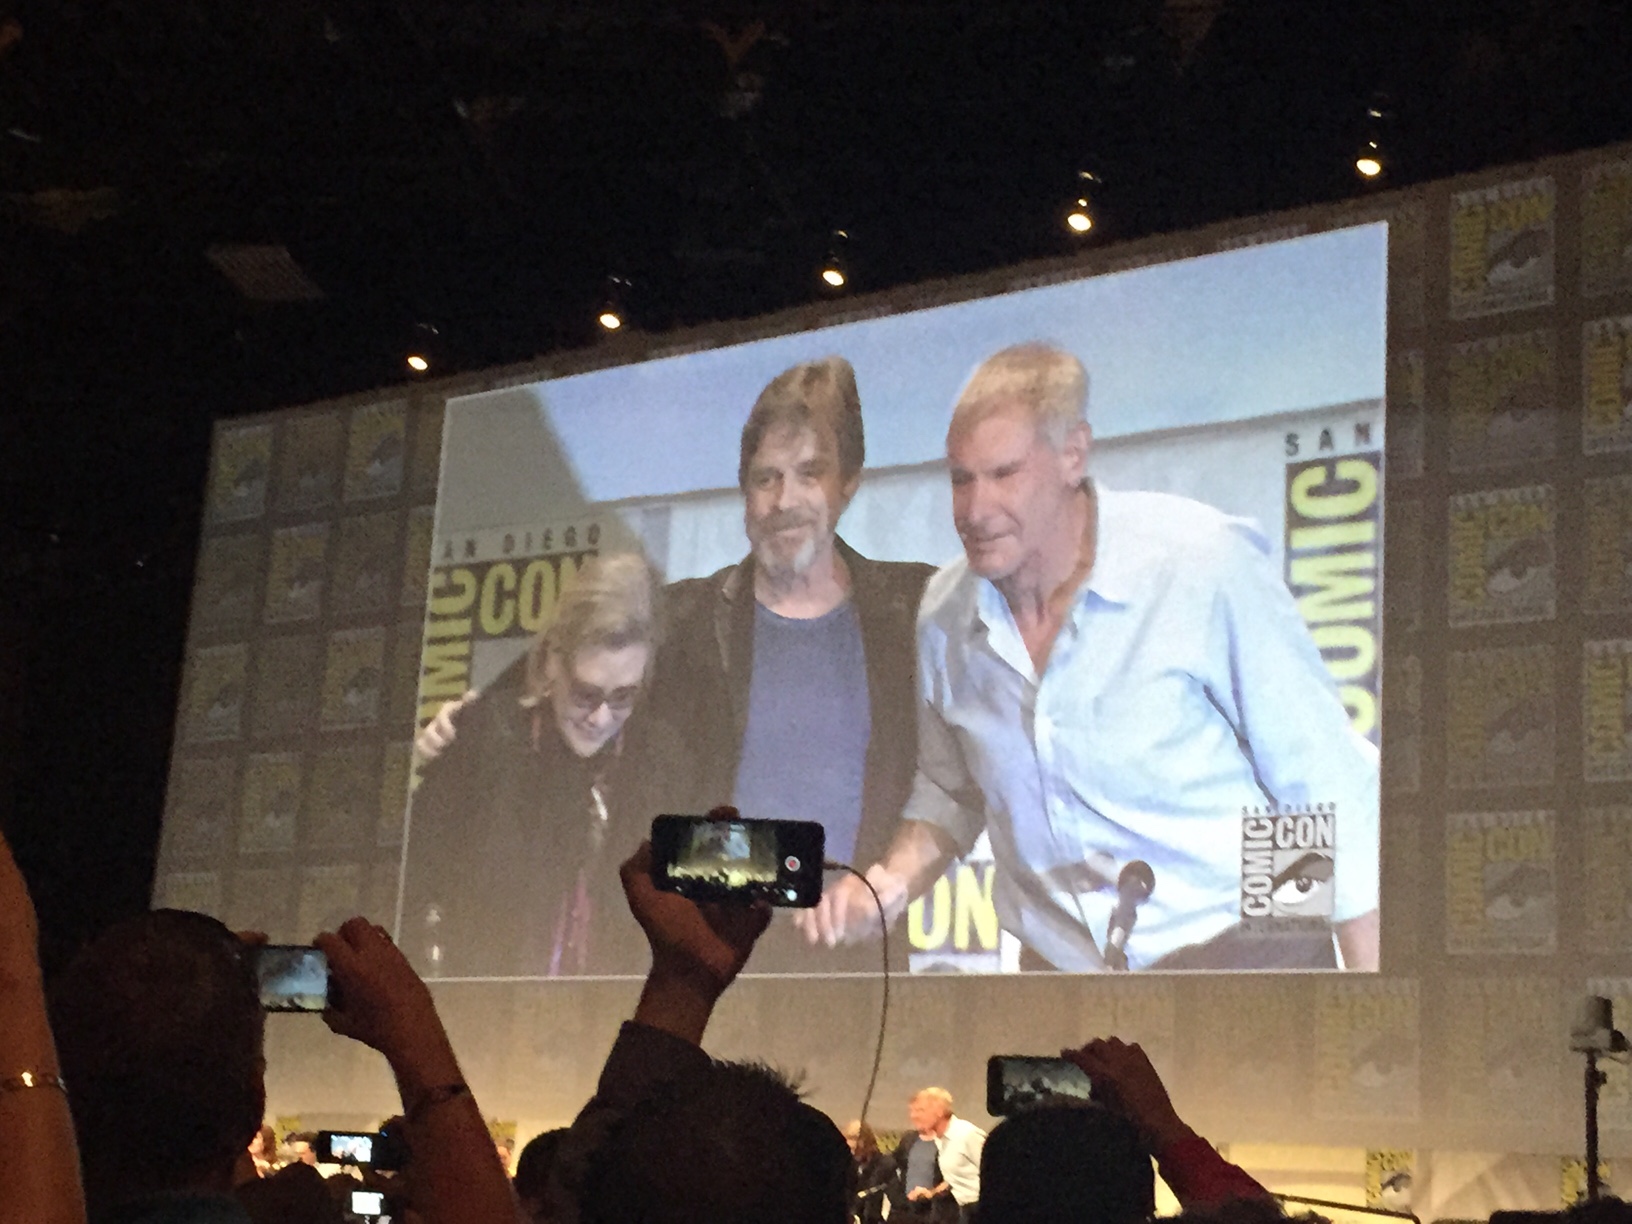 SDCC '15: What Secrets Did We Learn At The Star Wars: The Force Awakens Panel?